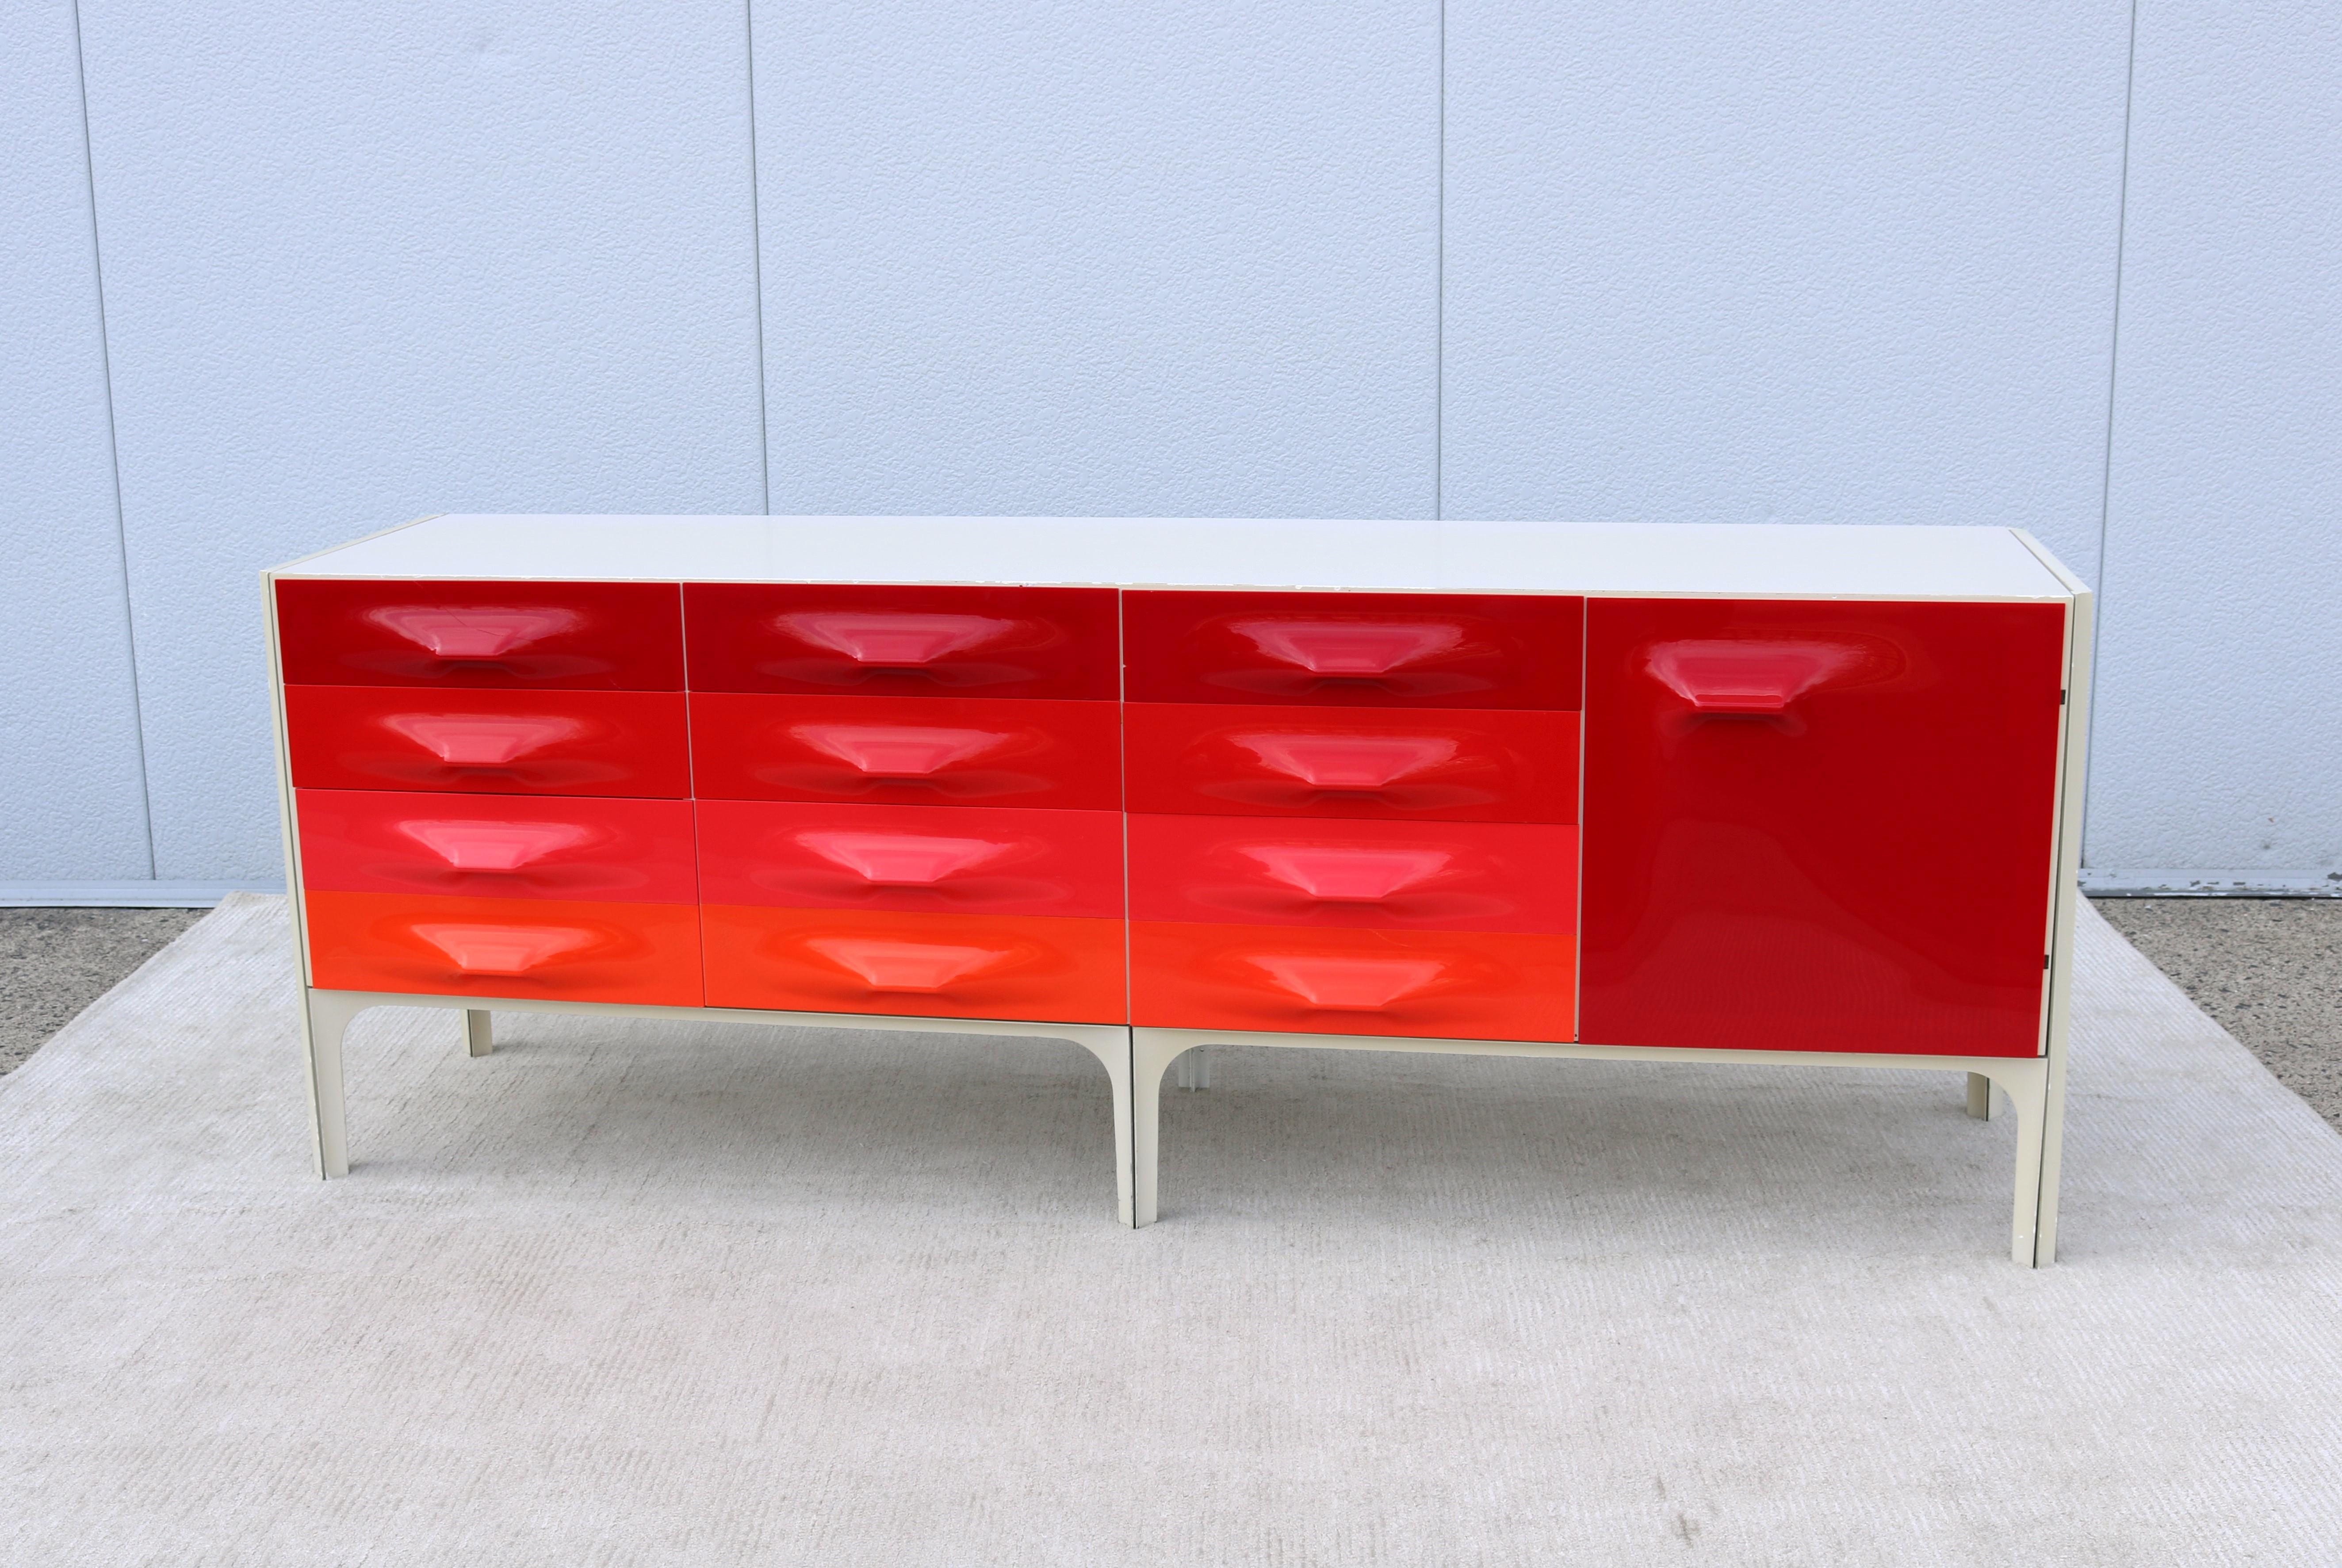 Fabulous large version of the classic DF2000 credenza or dresser by Raymond Loewy.
Featuring nine drawers and a cabinet, the molded plastic drawer fronts are organized in the designer's signature graduated bands of pop art colored shades of red to